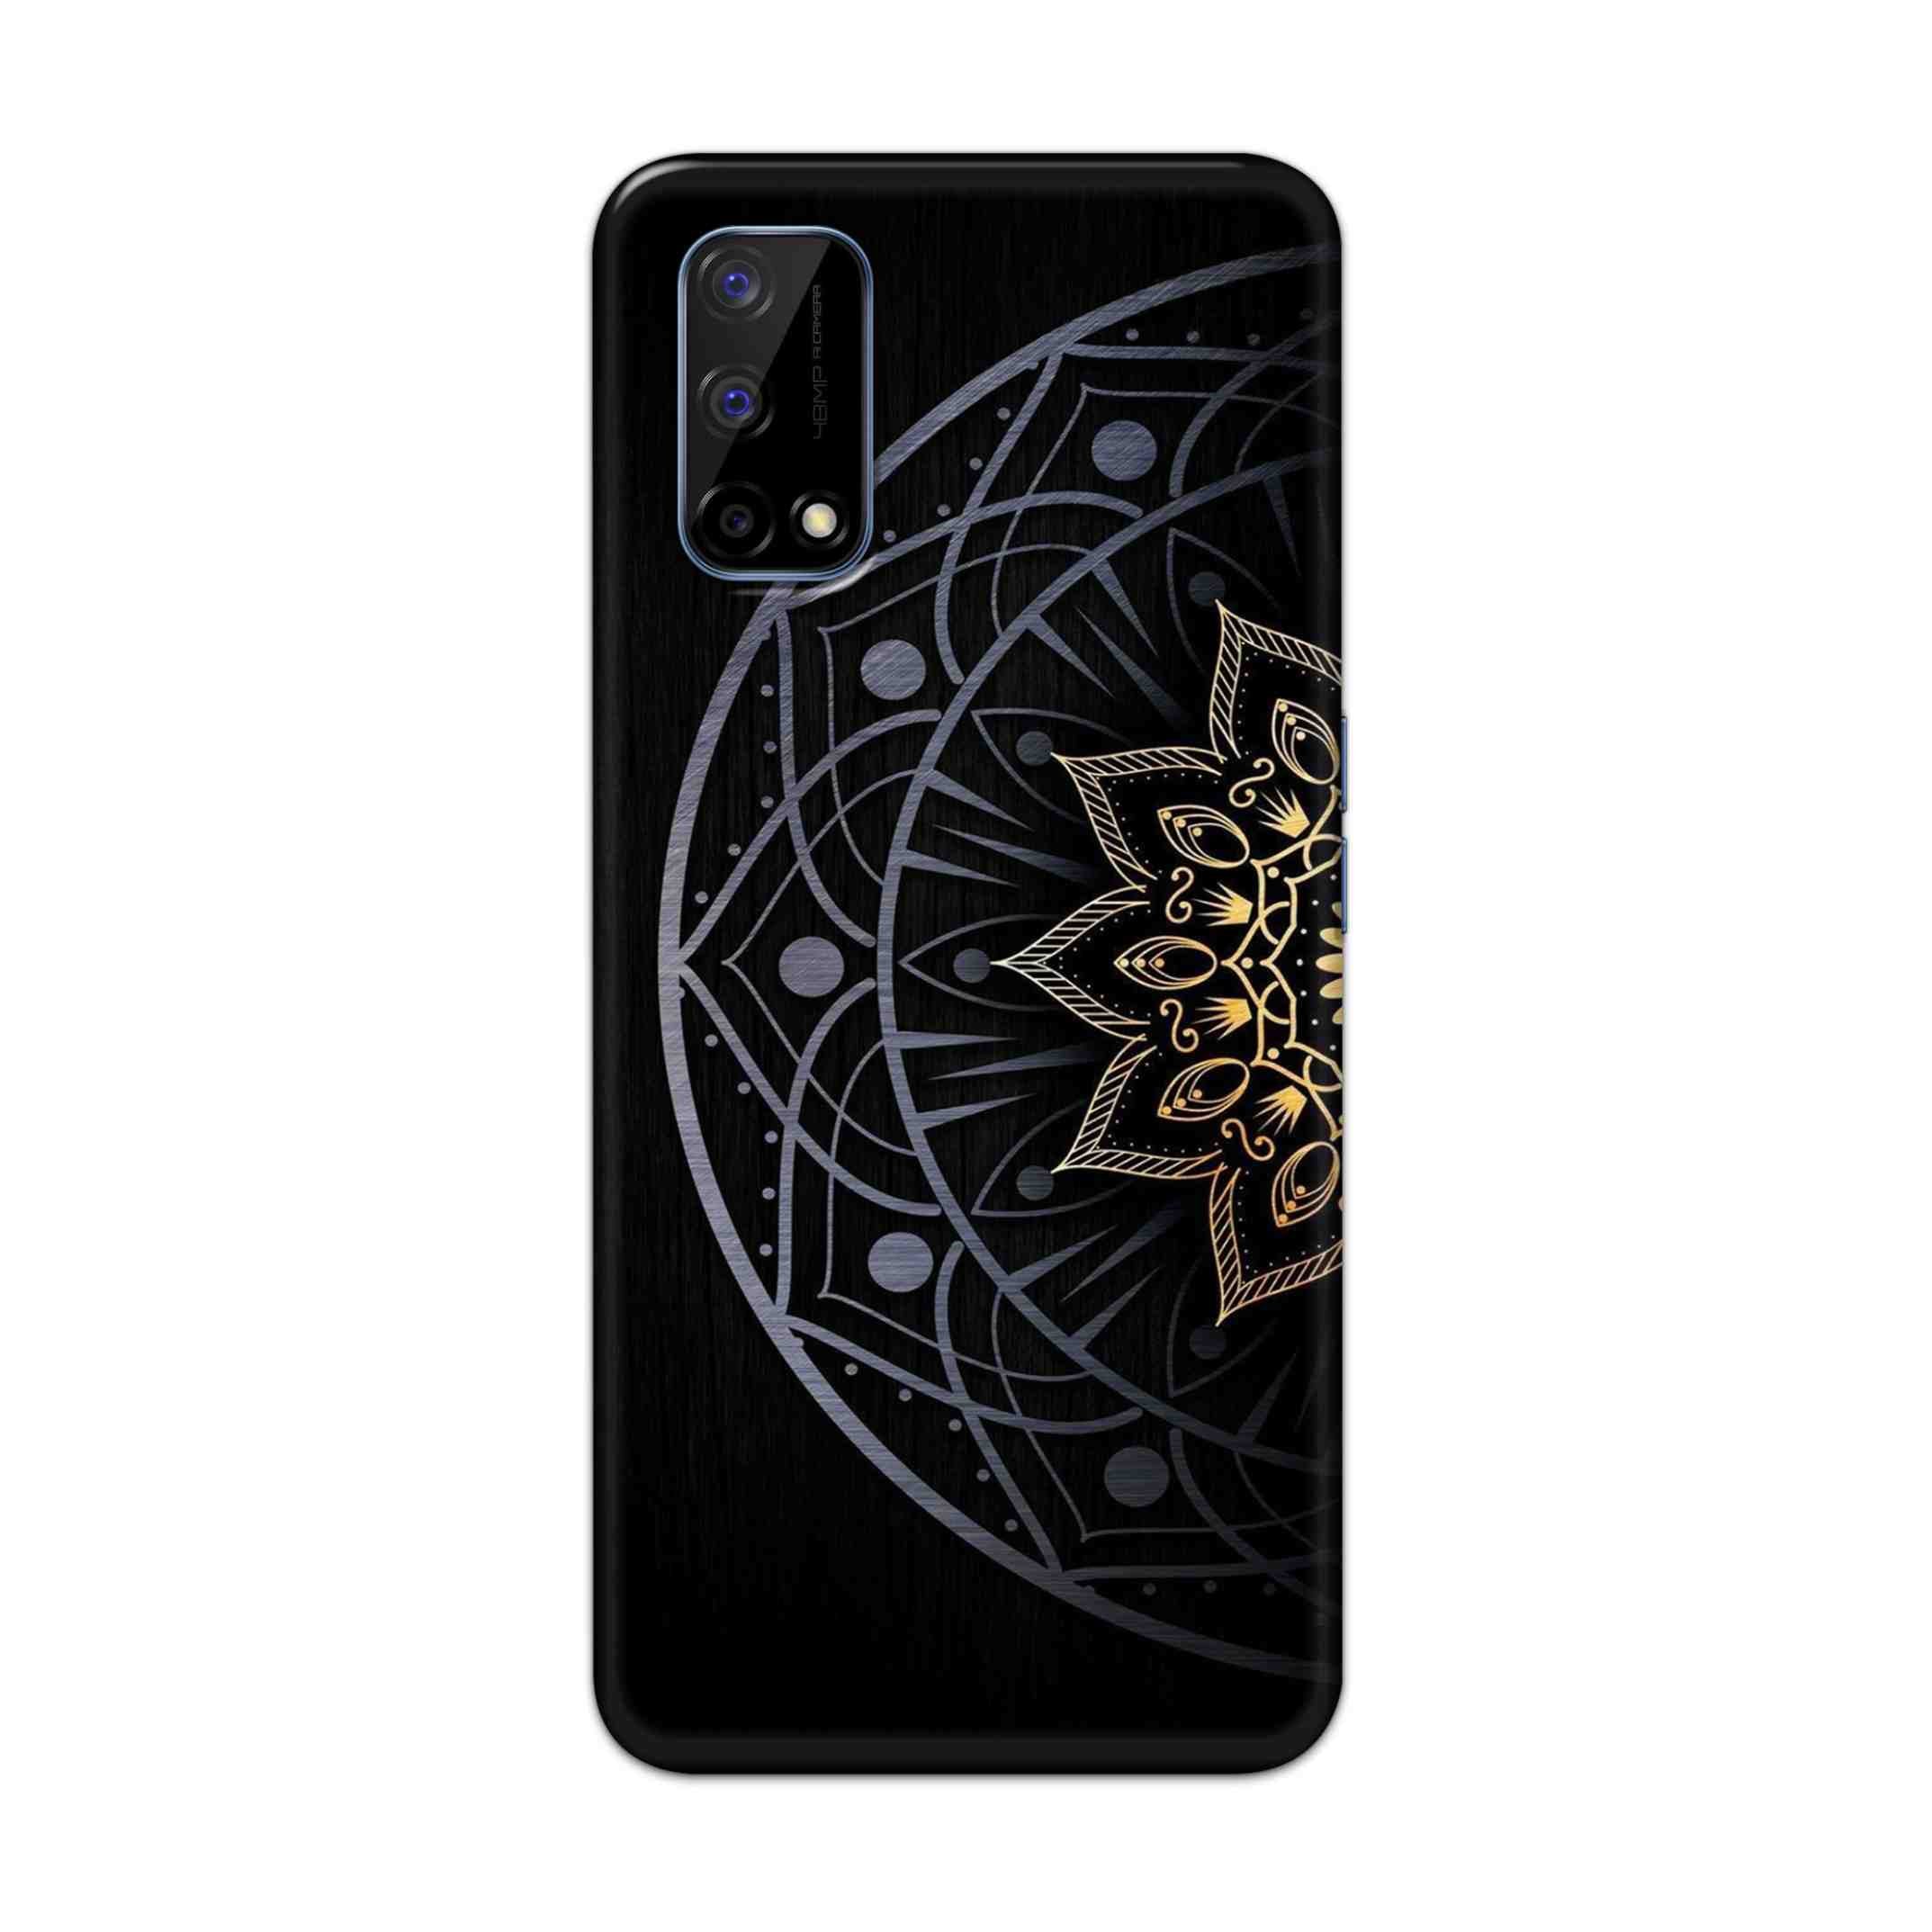 Buy Psychedelic Mandalas Hard Back Mobile Phone Case Cover For Realme Narzo 30 Pro Online